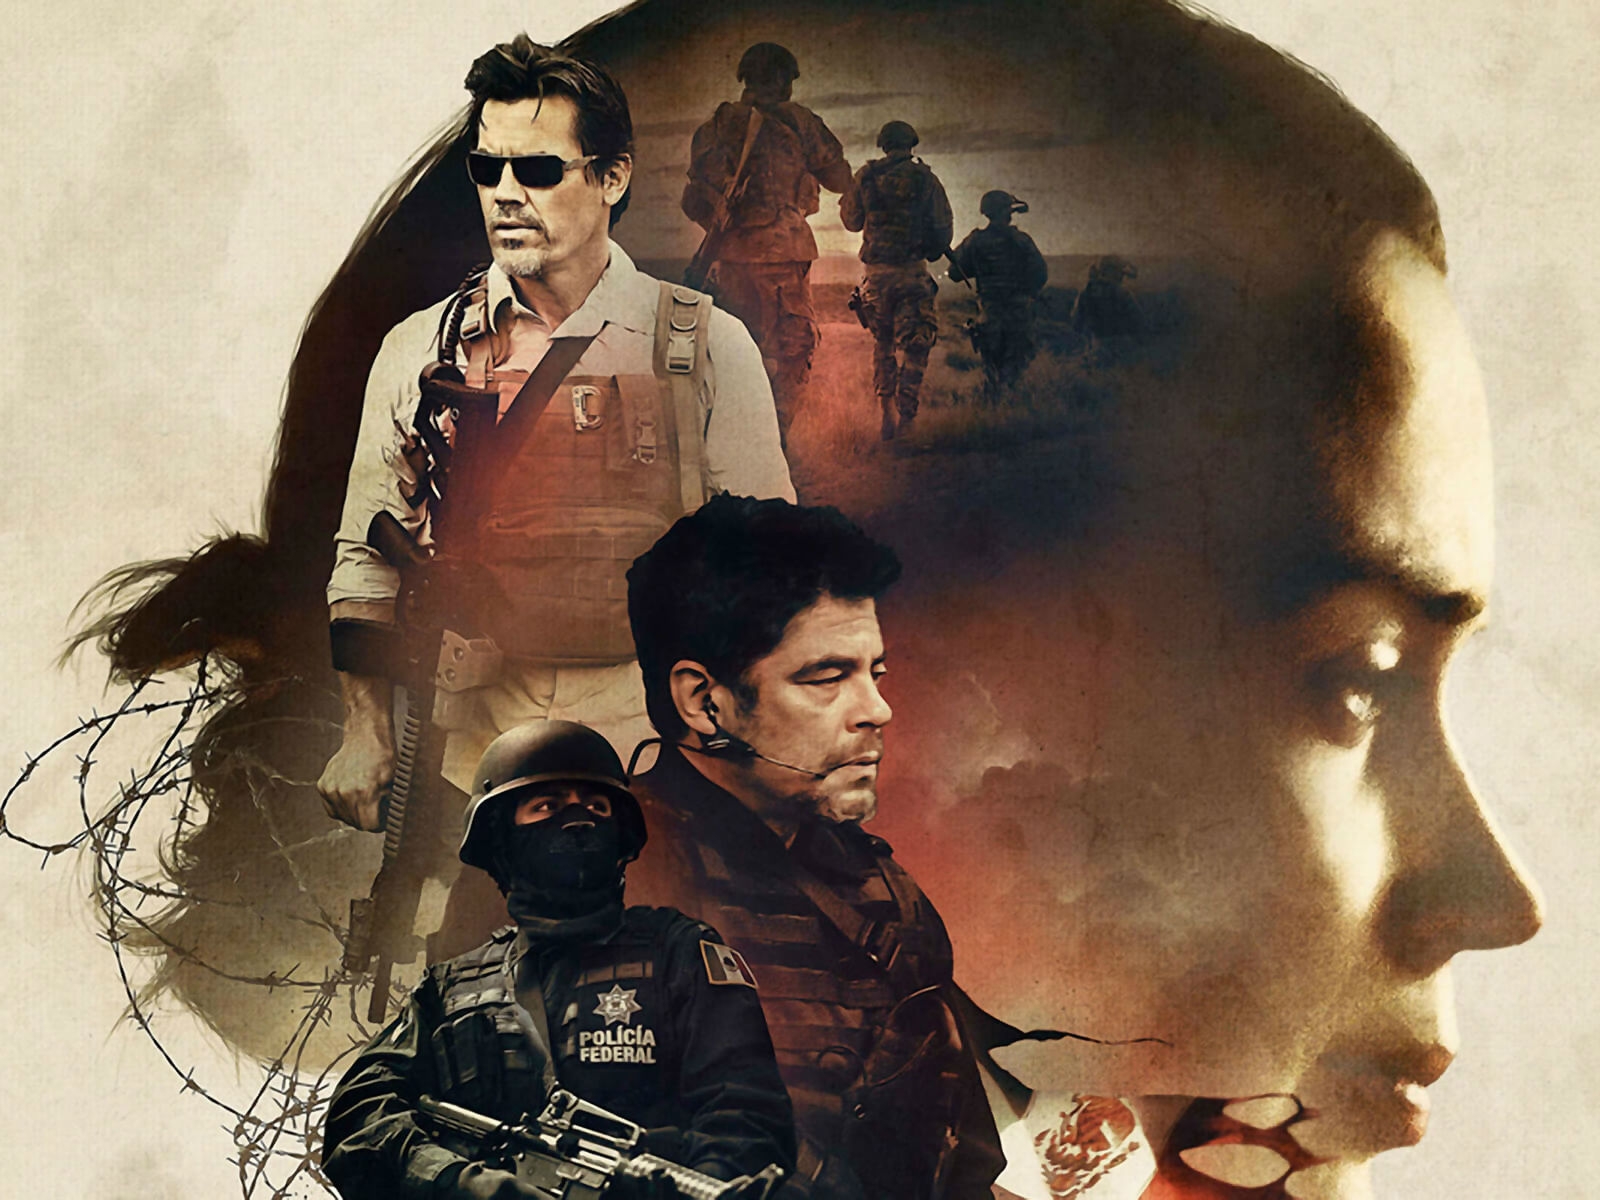 Sicario Movie Poster for 1600 x 1200 resolution